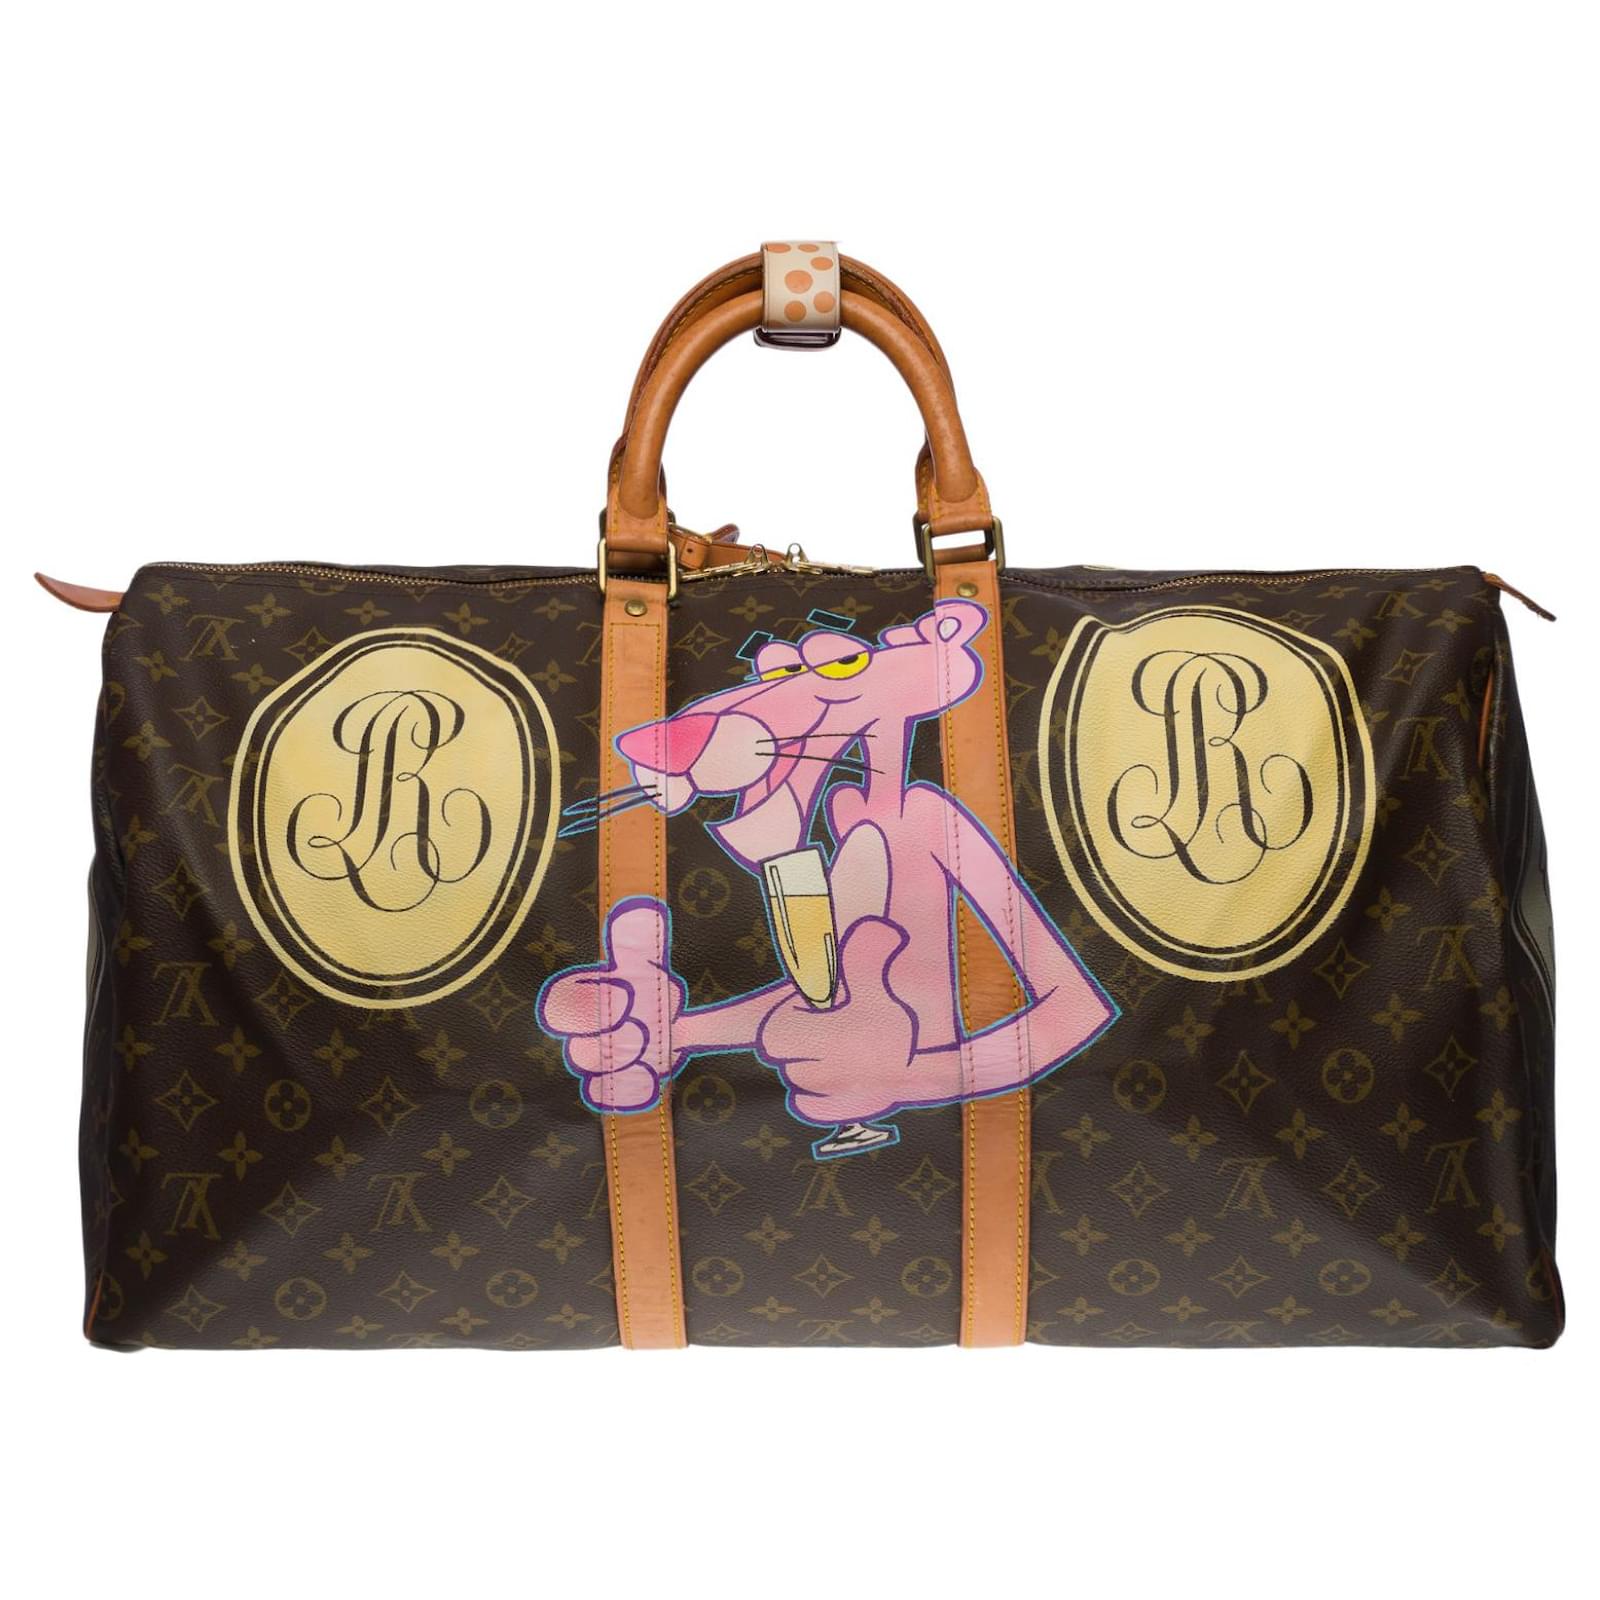 Travel bag Louis Vuitton Keepall 55 customized Be or not to be  by PatBo!